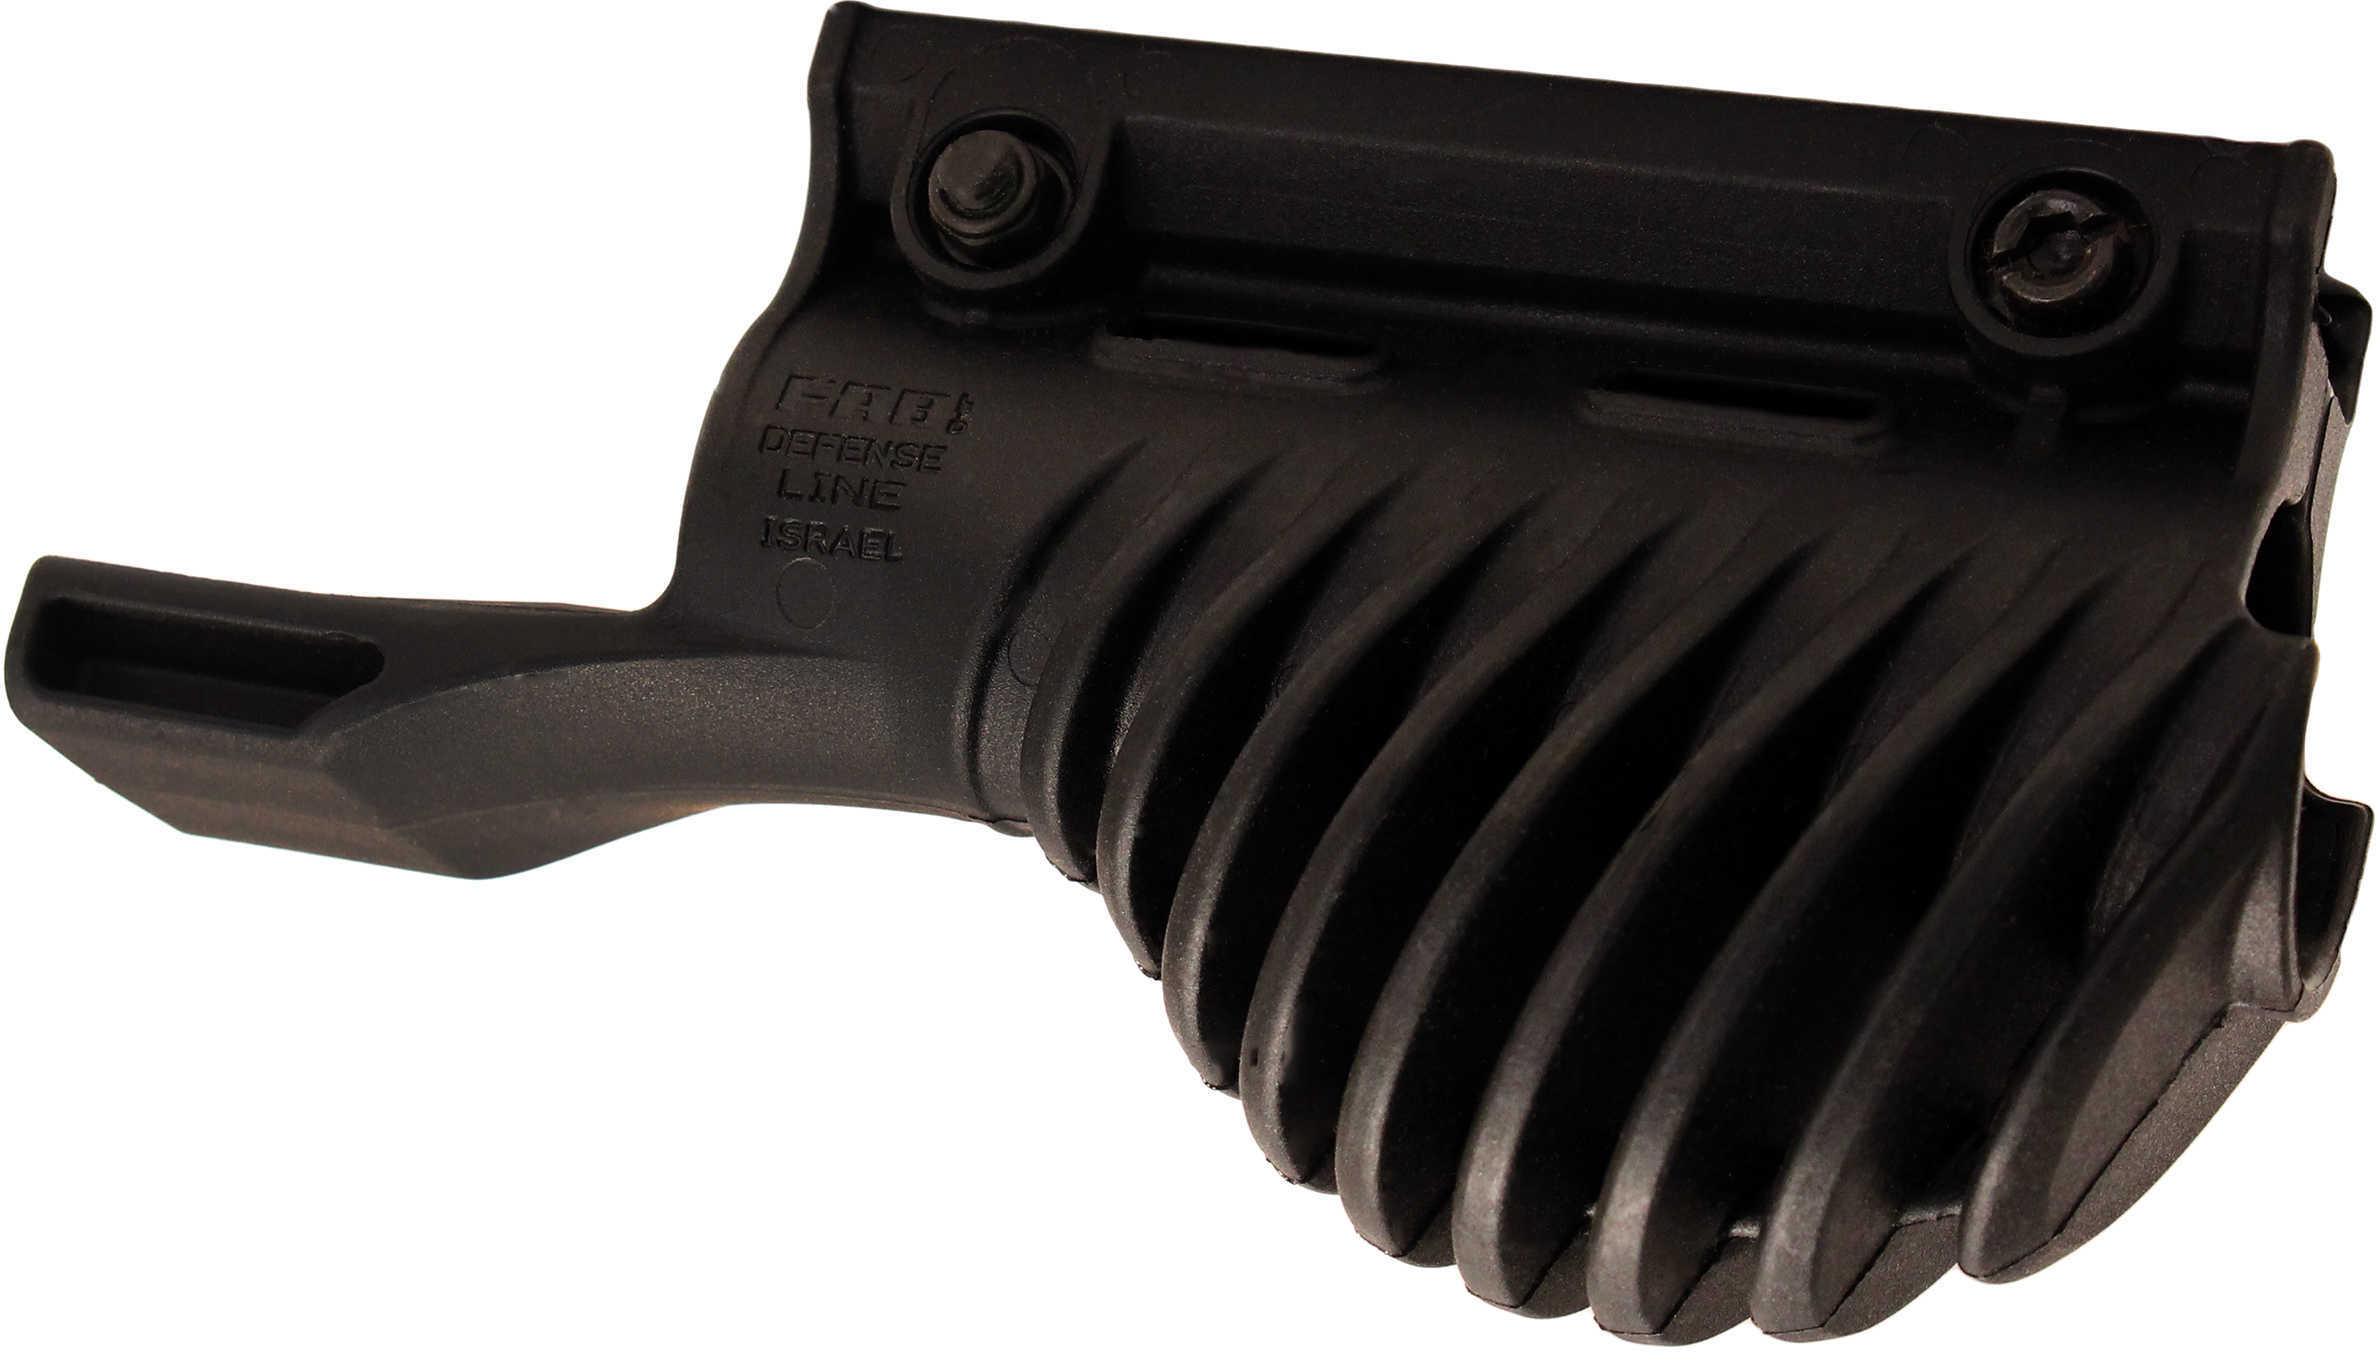 Mako Group Tactical Horizontal Foregrip w/1” Flashlight Adapter Md: MIKI 1"